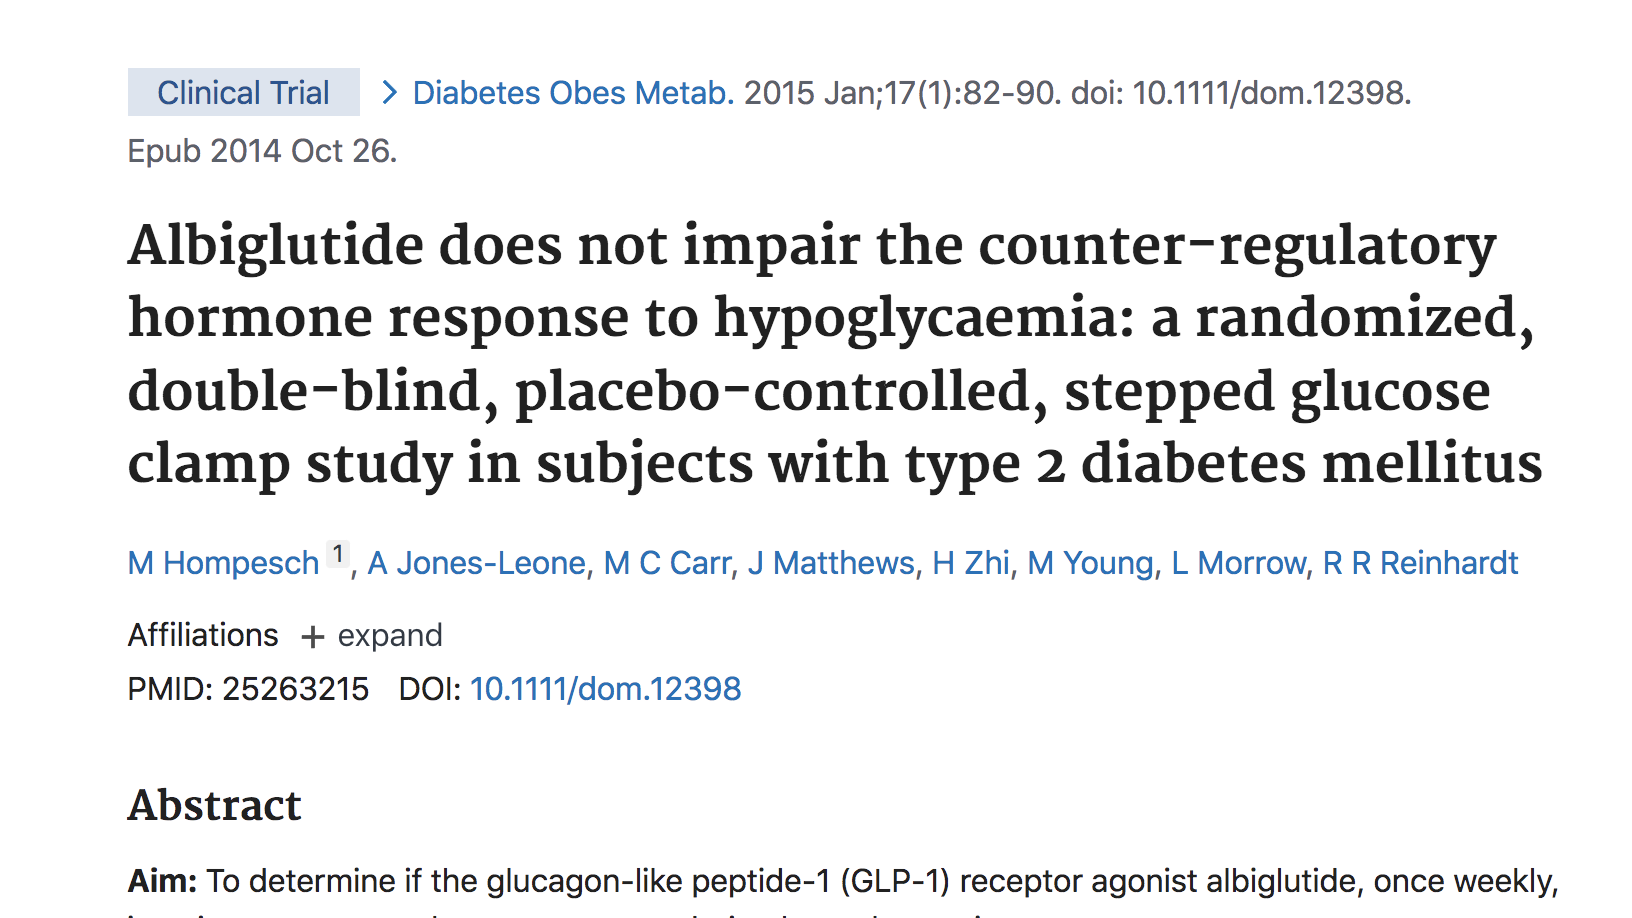 image of Albiglutide does not impair the counter-regulatory hormone response to hypoglycaemia: a randomized, double-blind, placebo-controlled, stepped glucose clamp study in subjects with type 2